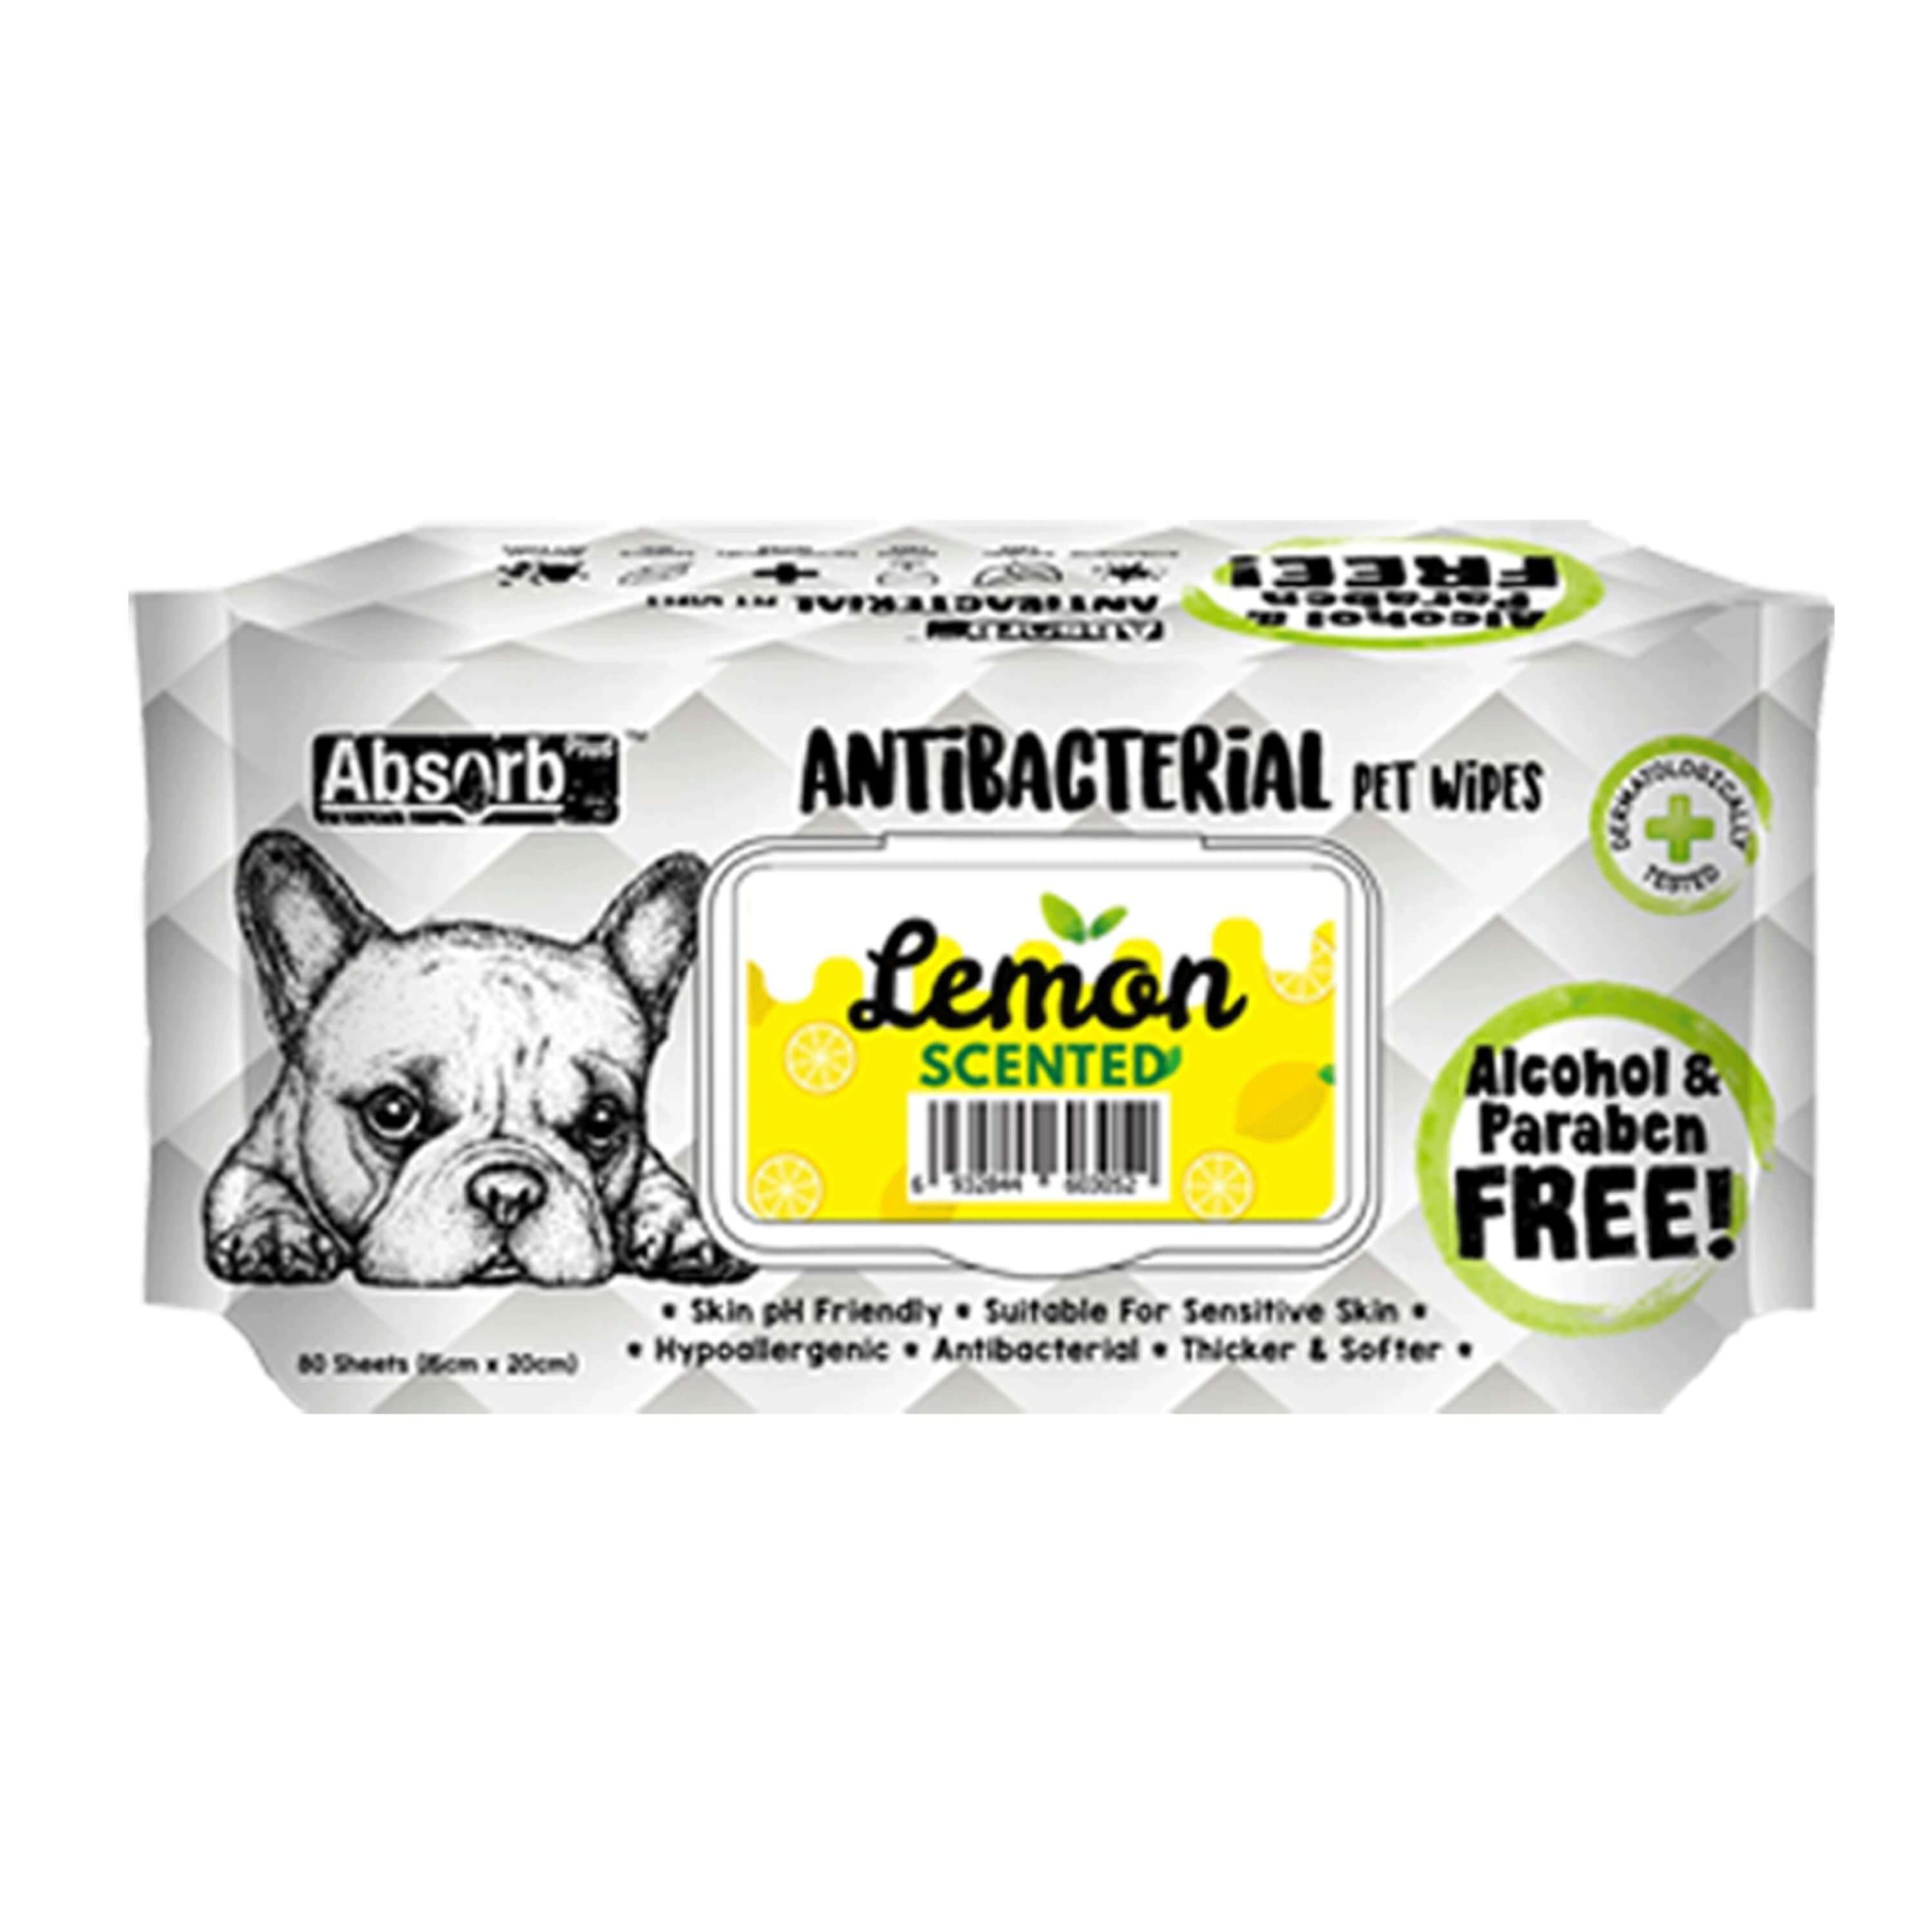 Absorb Plus - Antibacterial Pet Wipes 80pcs for Dogs (7 Scents)